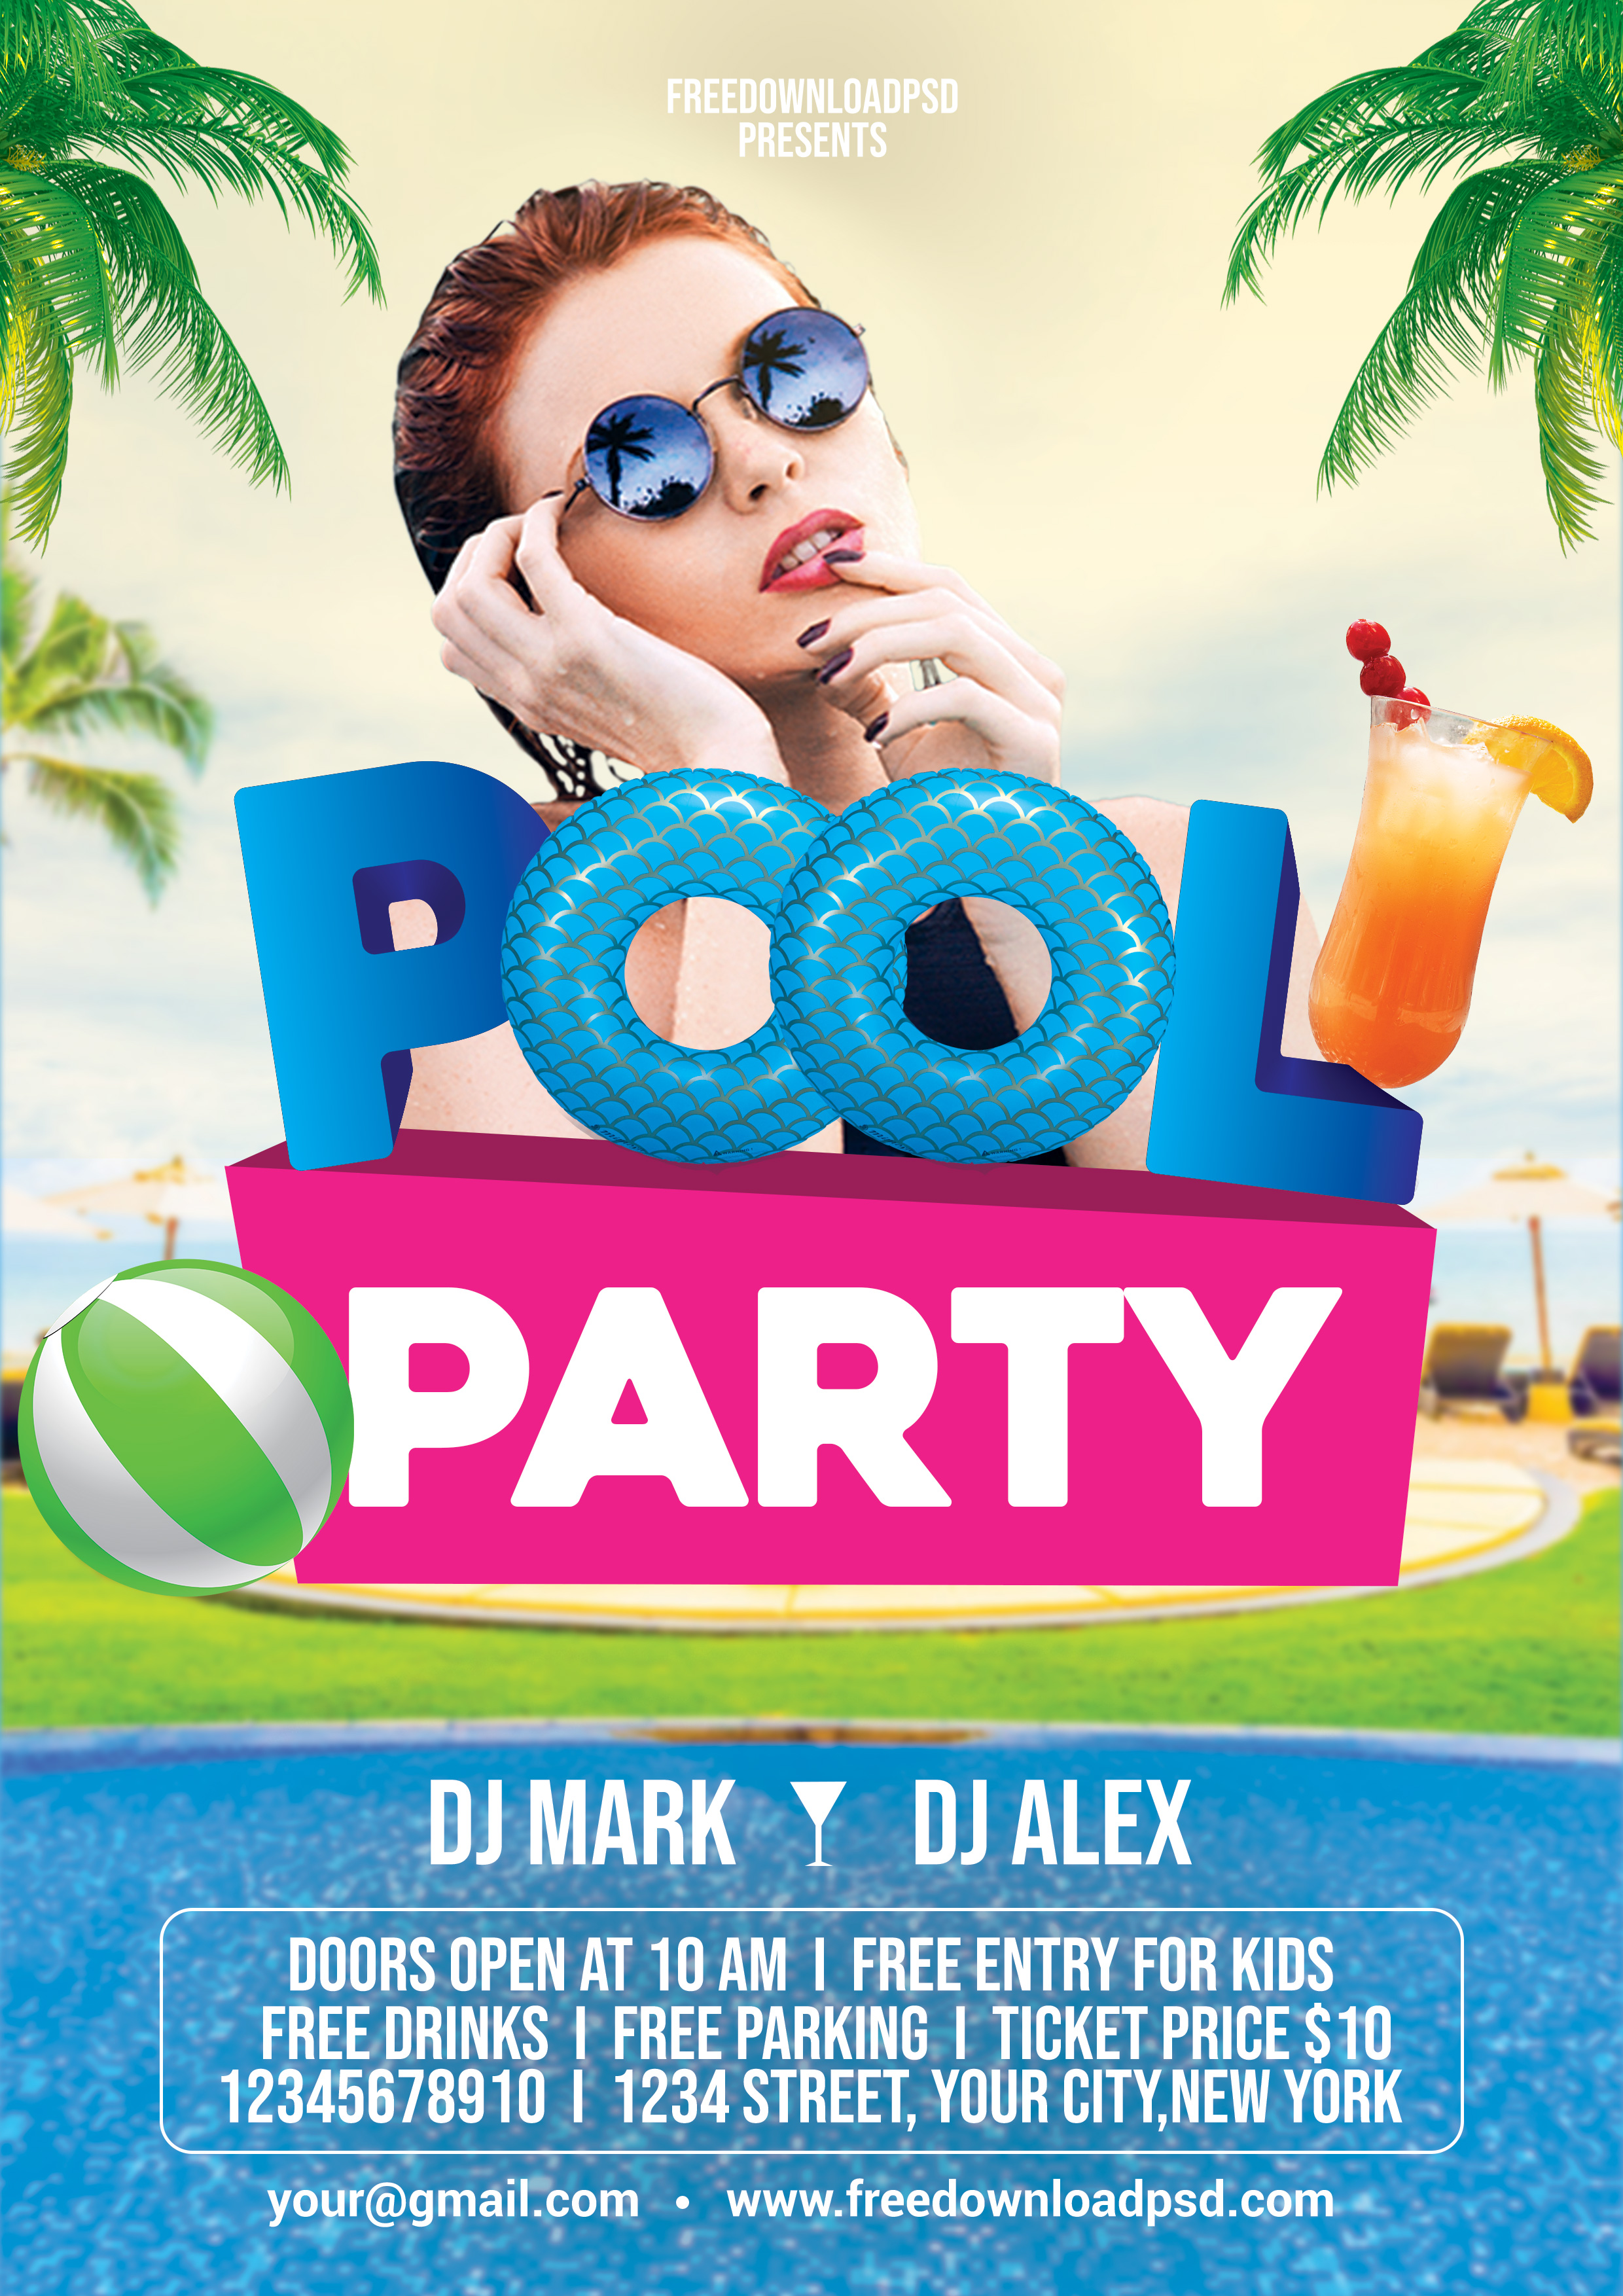 Pool Party Flyer PSD